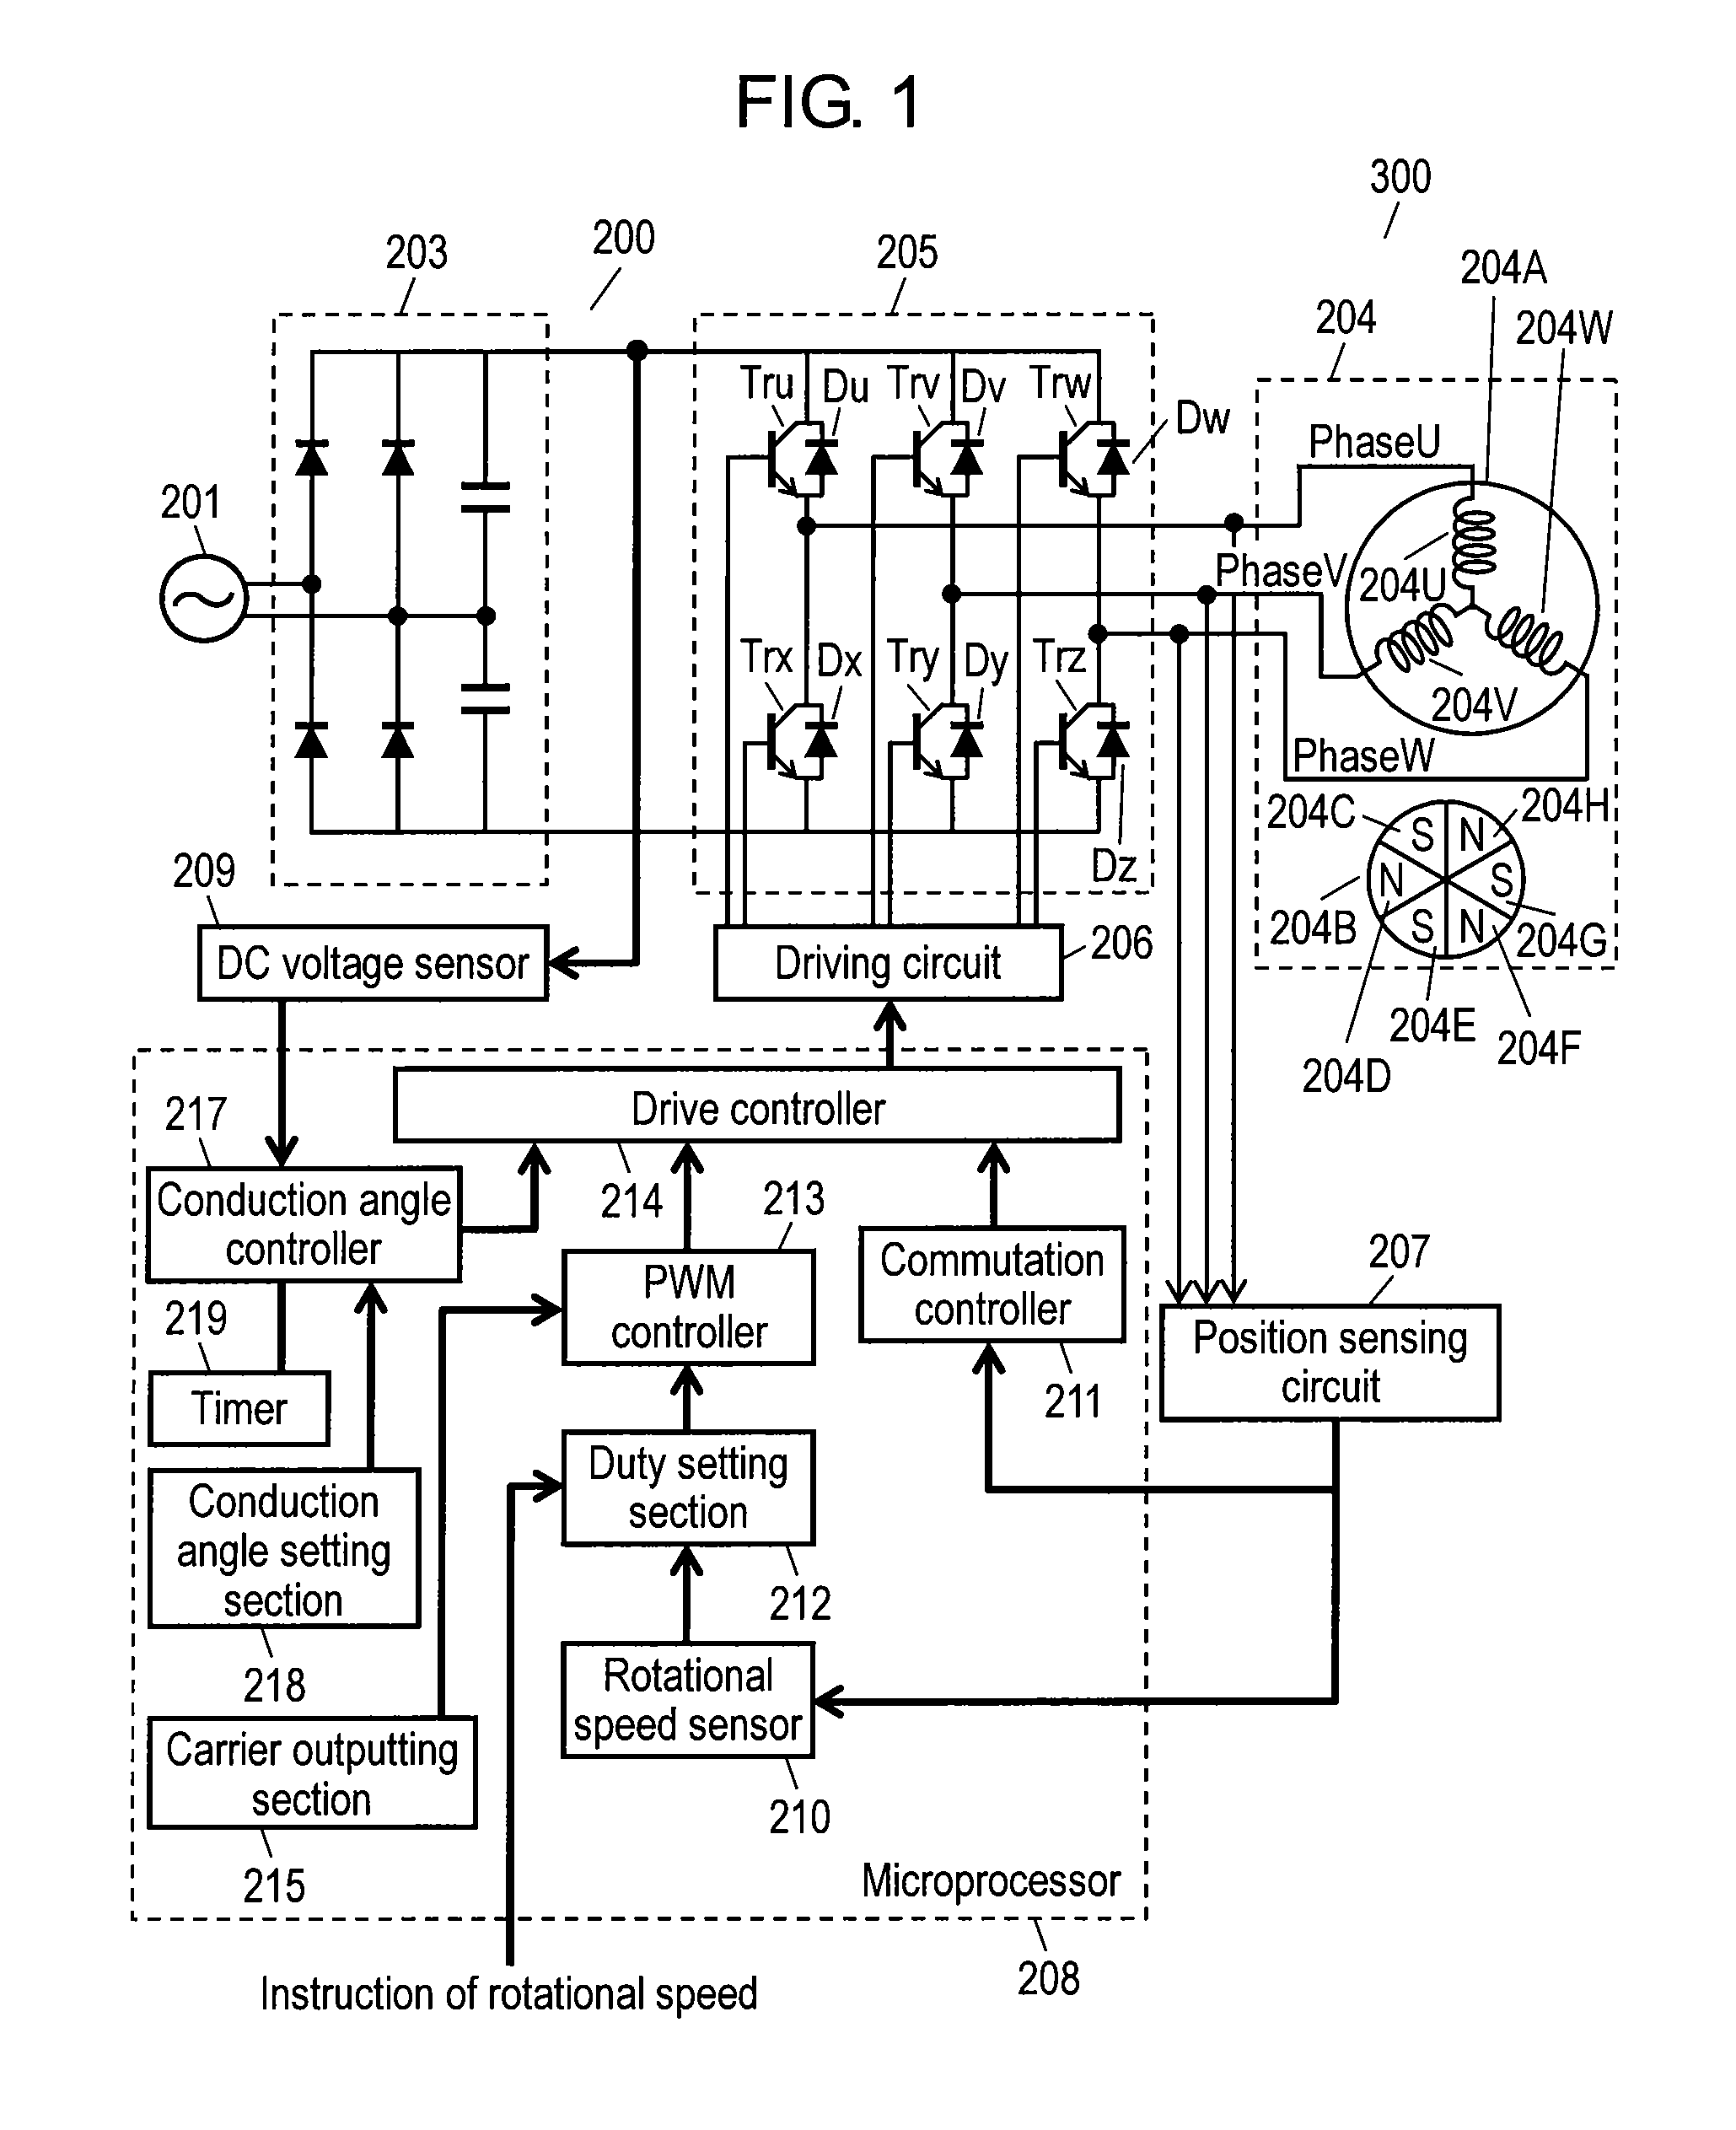 Conduction angle control of brushless motor